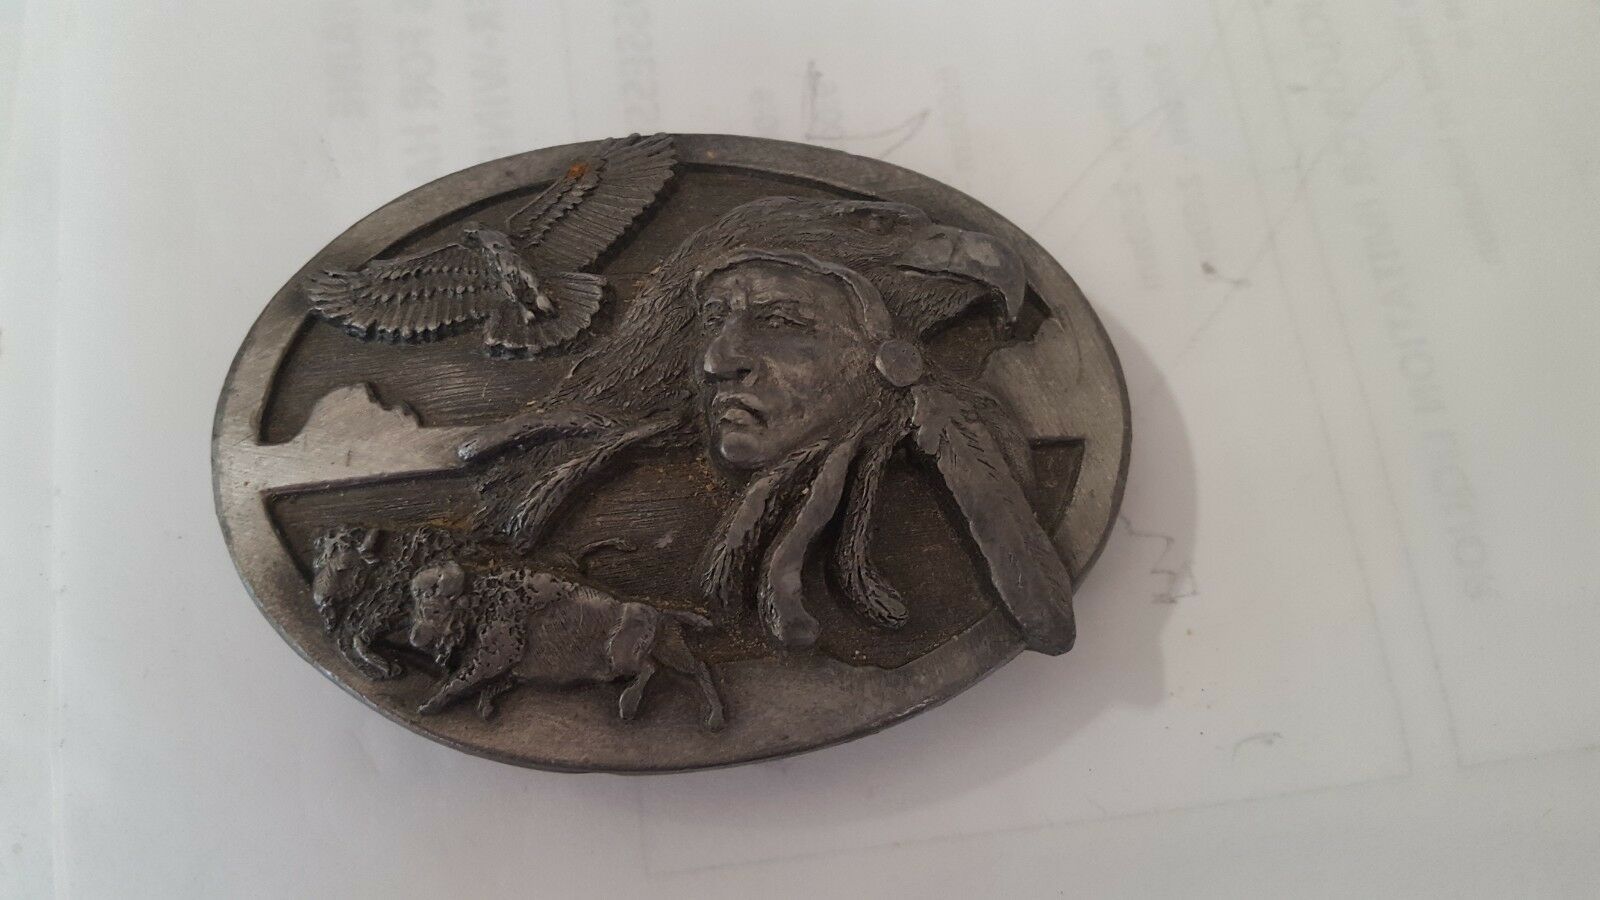 Primary image for AG-20 INDIAN CHIEF FREE SPIRIT PEWTER BELT BUCKLE ARROYO GRANDE BUCKLE CO 1989